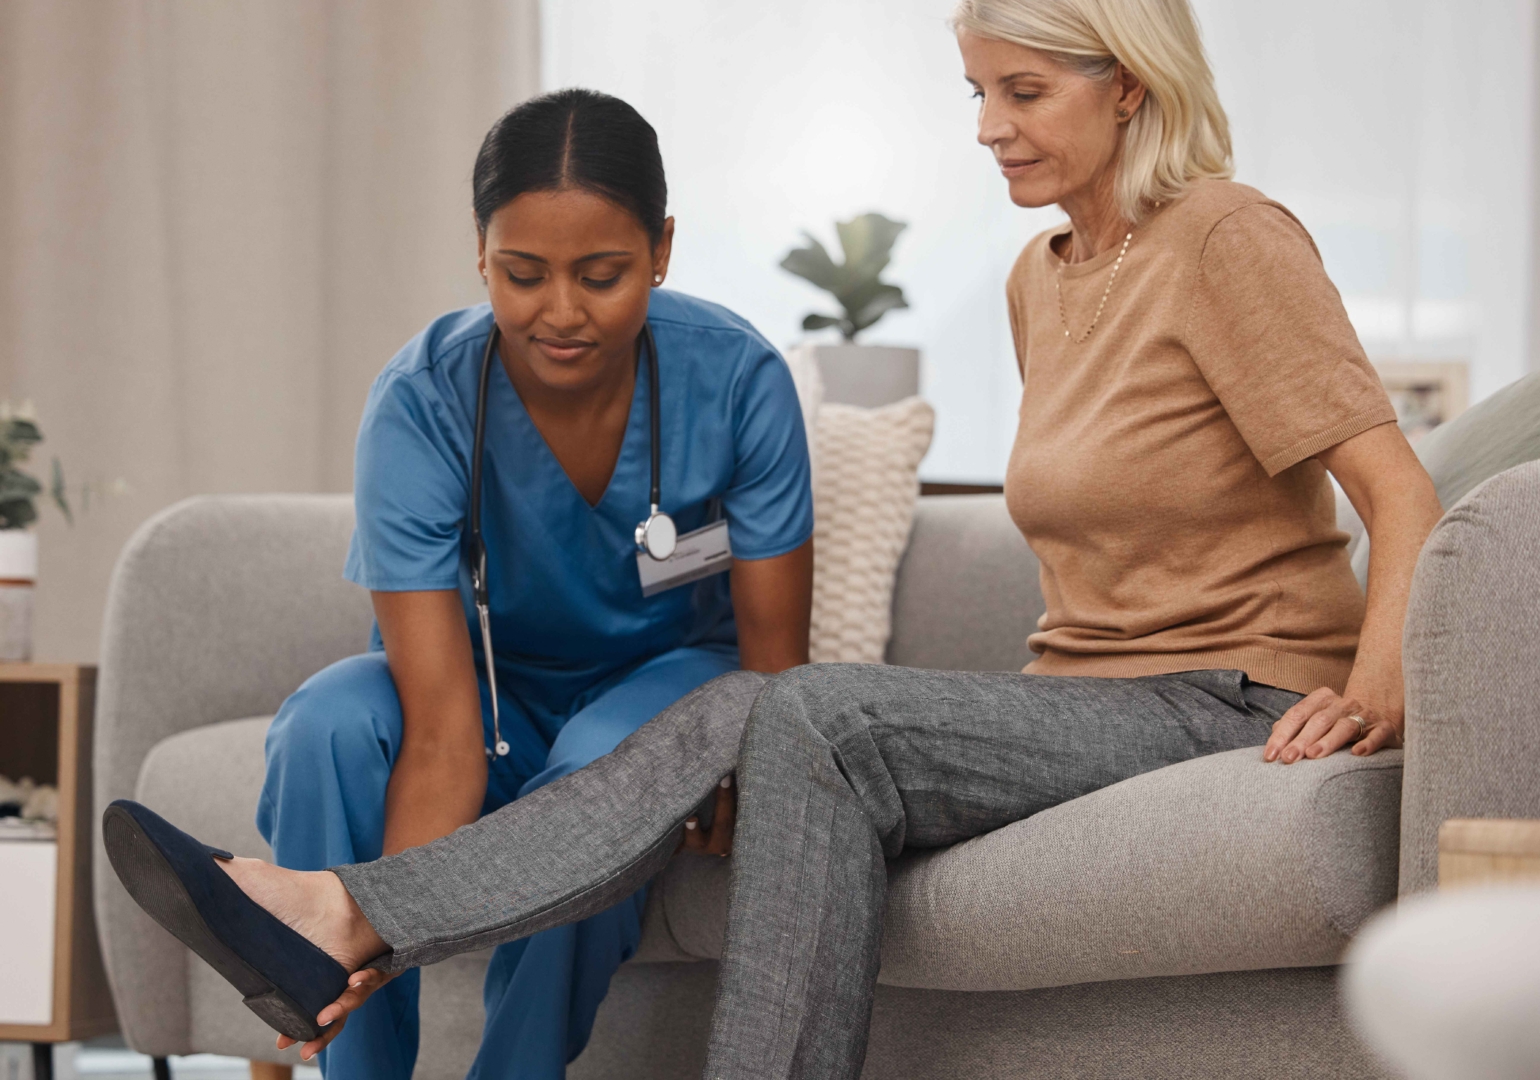 Foot, nurse or senior woman with physical therapy for injury, rehabilitation massage and healthcare worker help with pain. Elderly patient, doctor and physio therapist or medical expert on sofa.